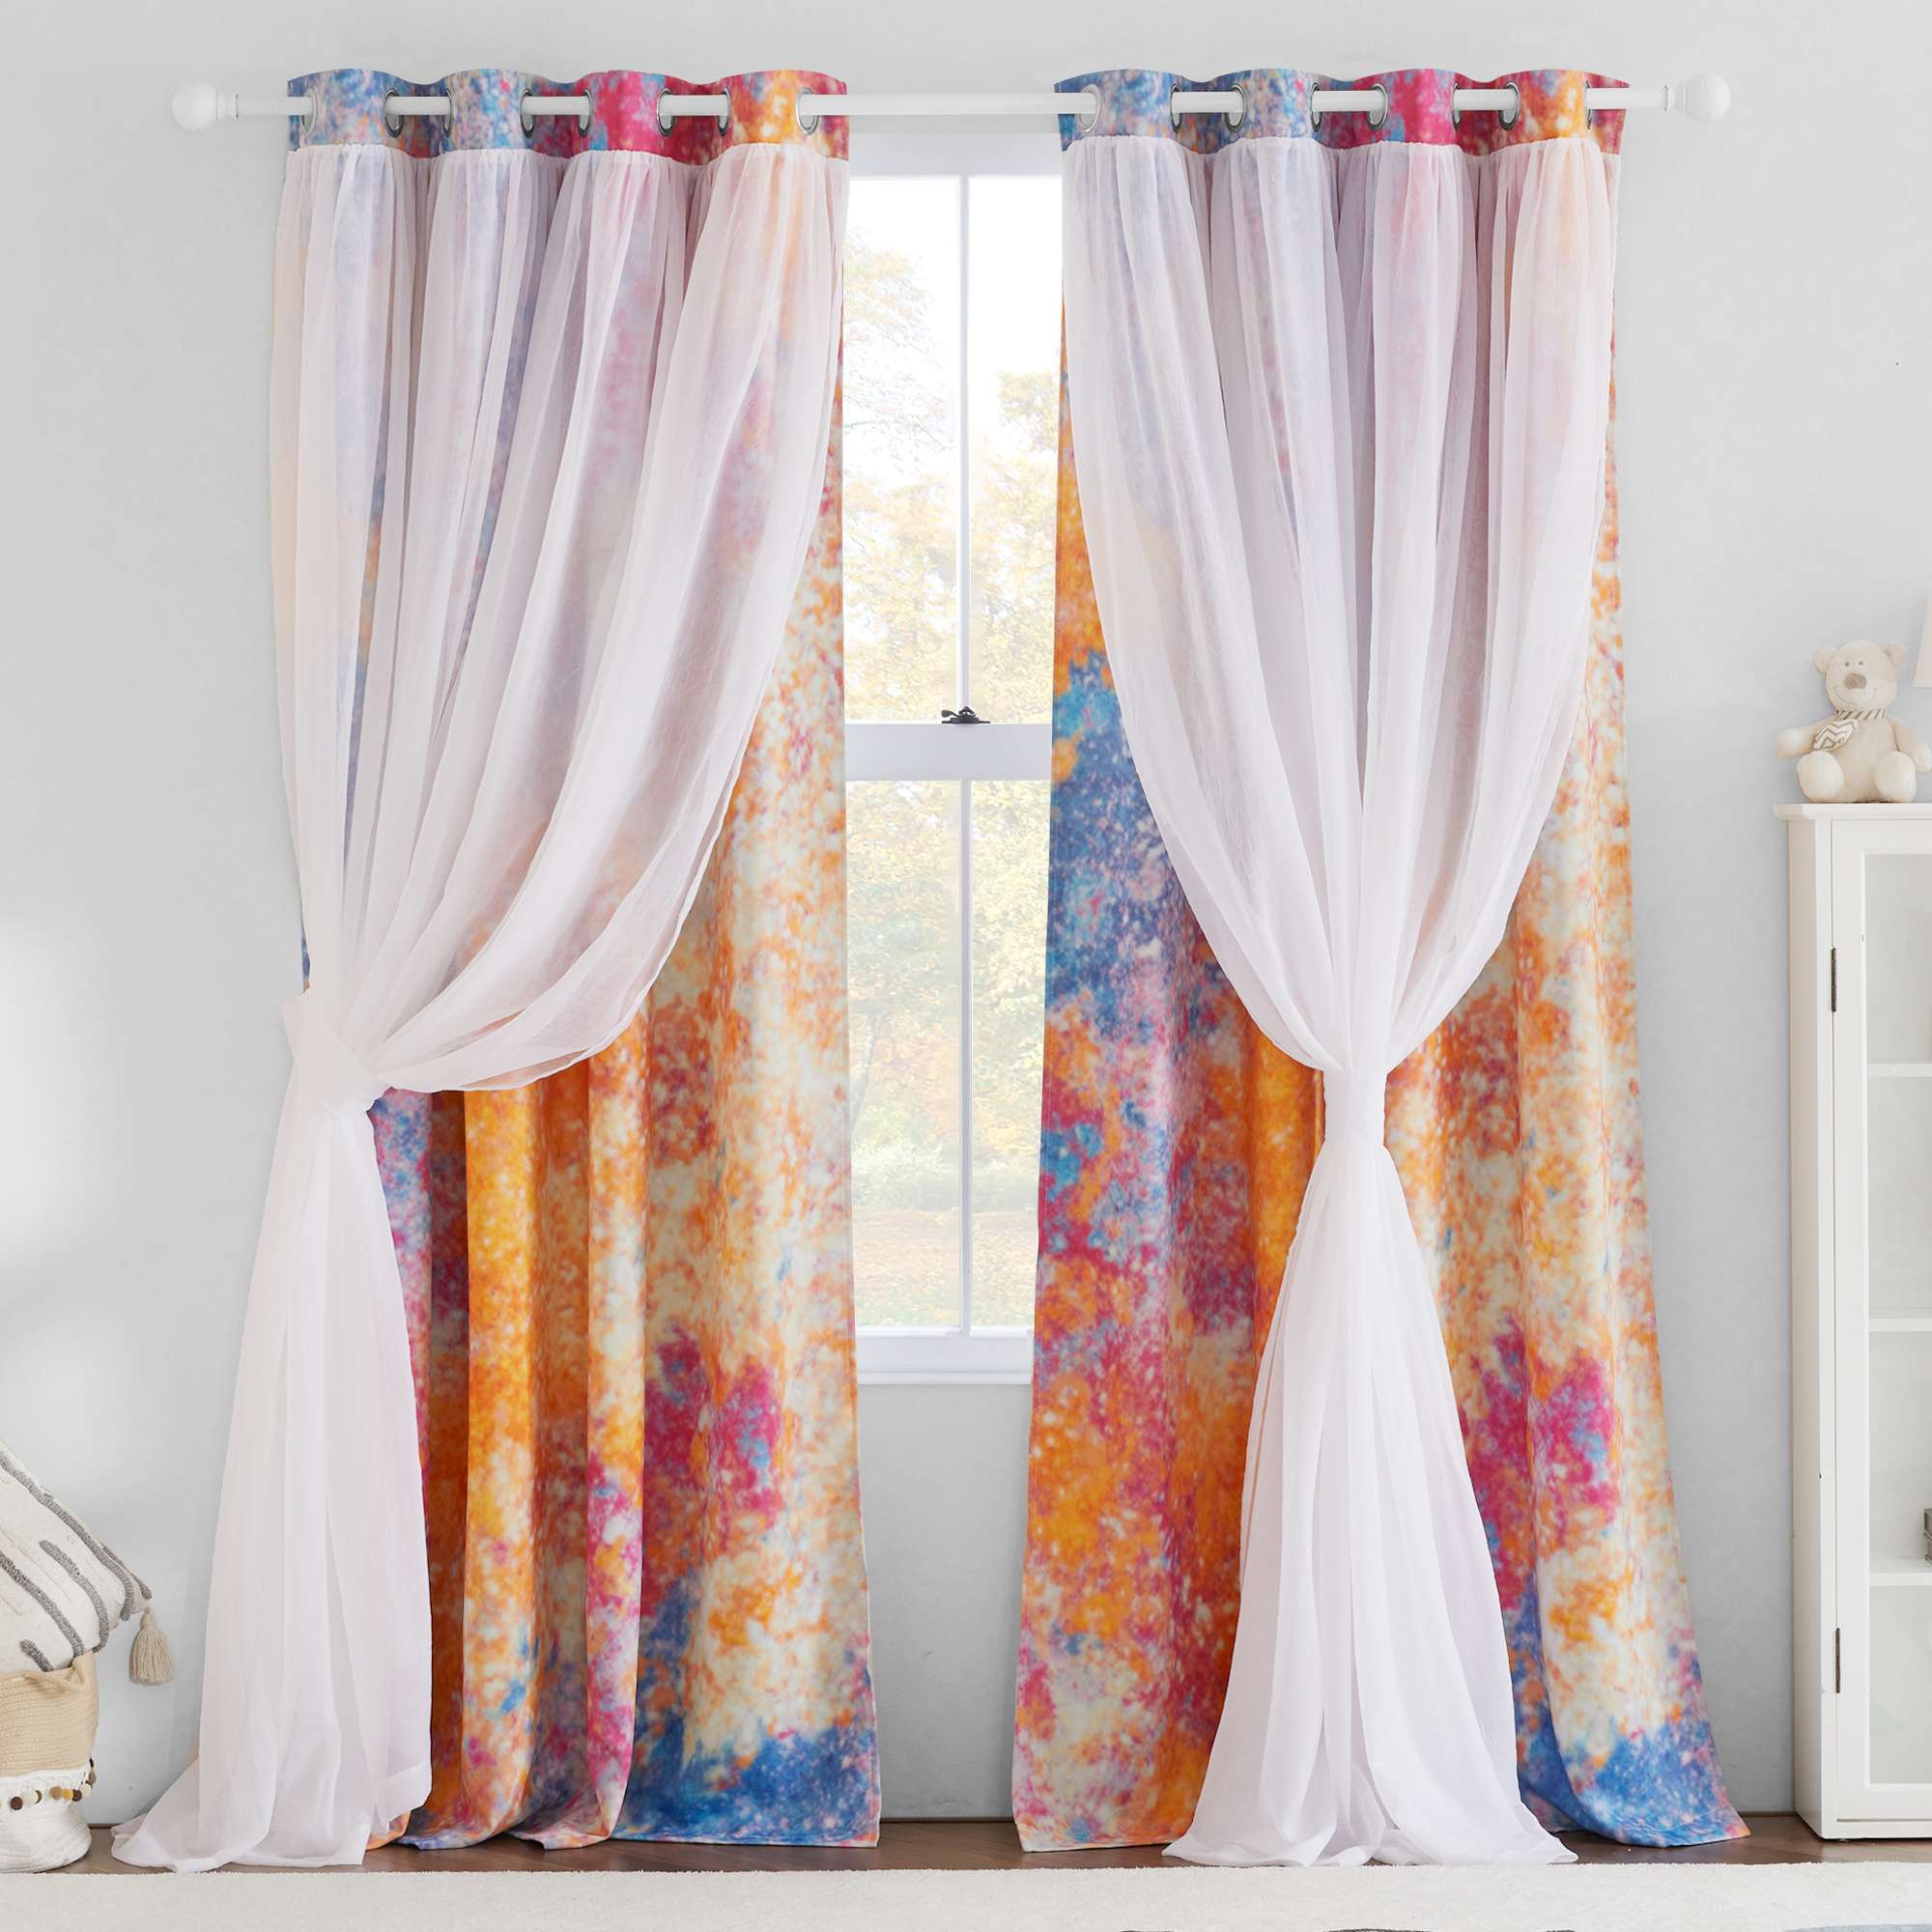 Double Layers Gradient Ombre Blackout Curtains With White Sheer Princess Curtains for Nursery 2 Panels